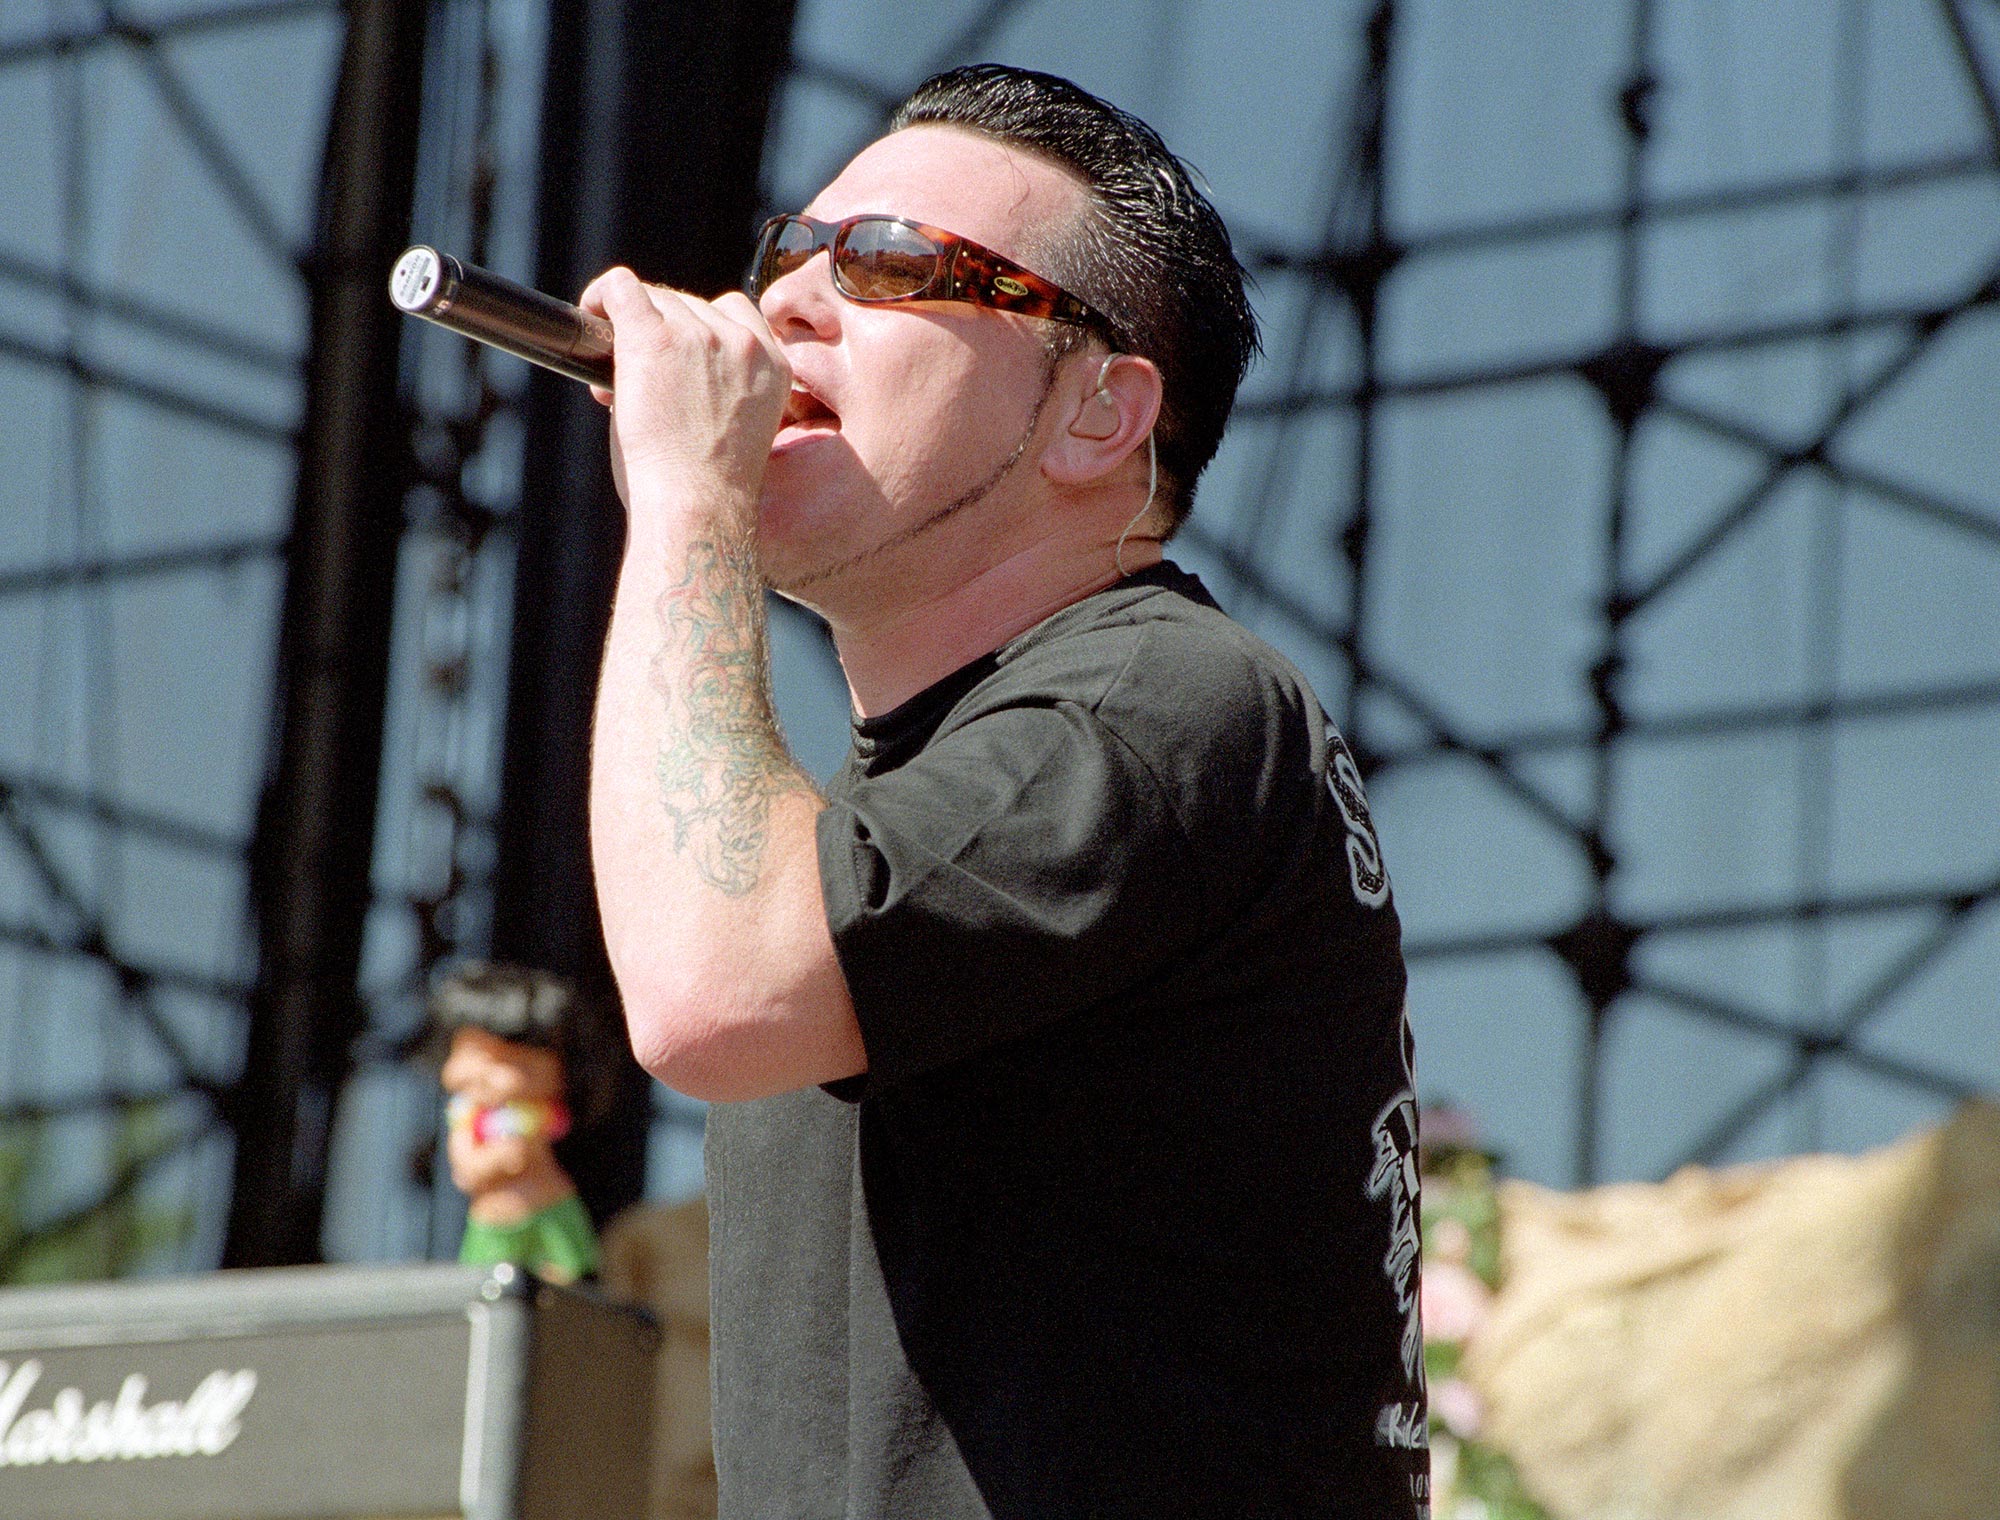 Smash Mouth's Steve Harwell: Death Reactions